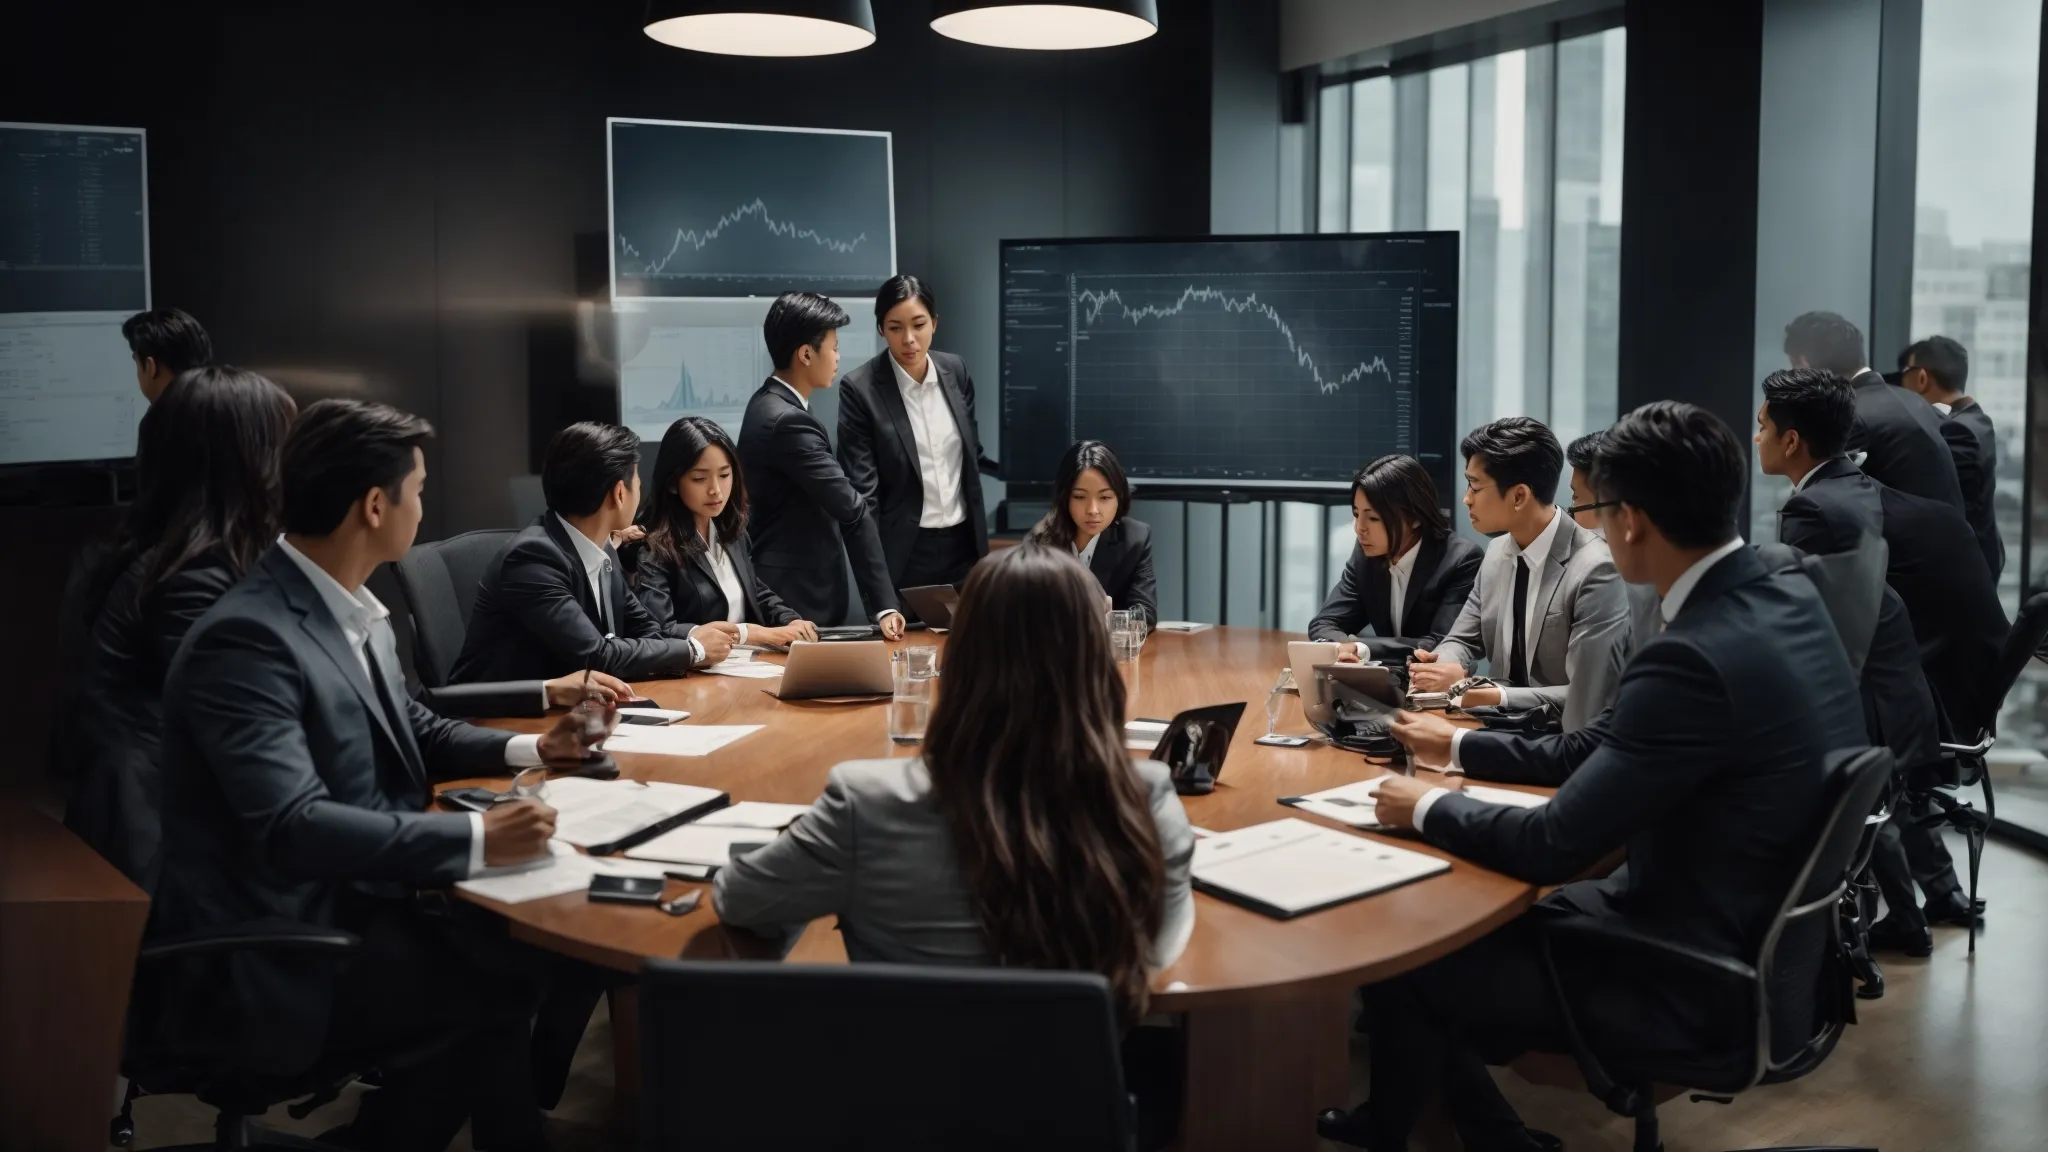 a group of professionals gather around a conference table with charts and digital devices, discussing strategies and analyzing market trends.